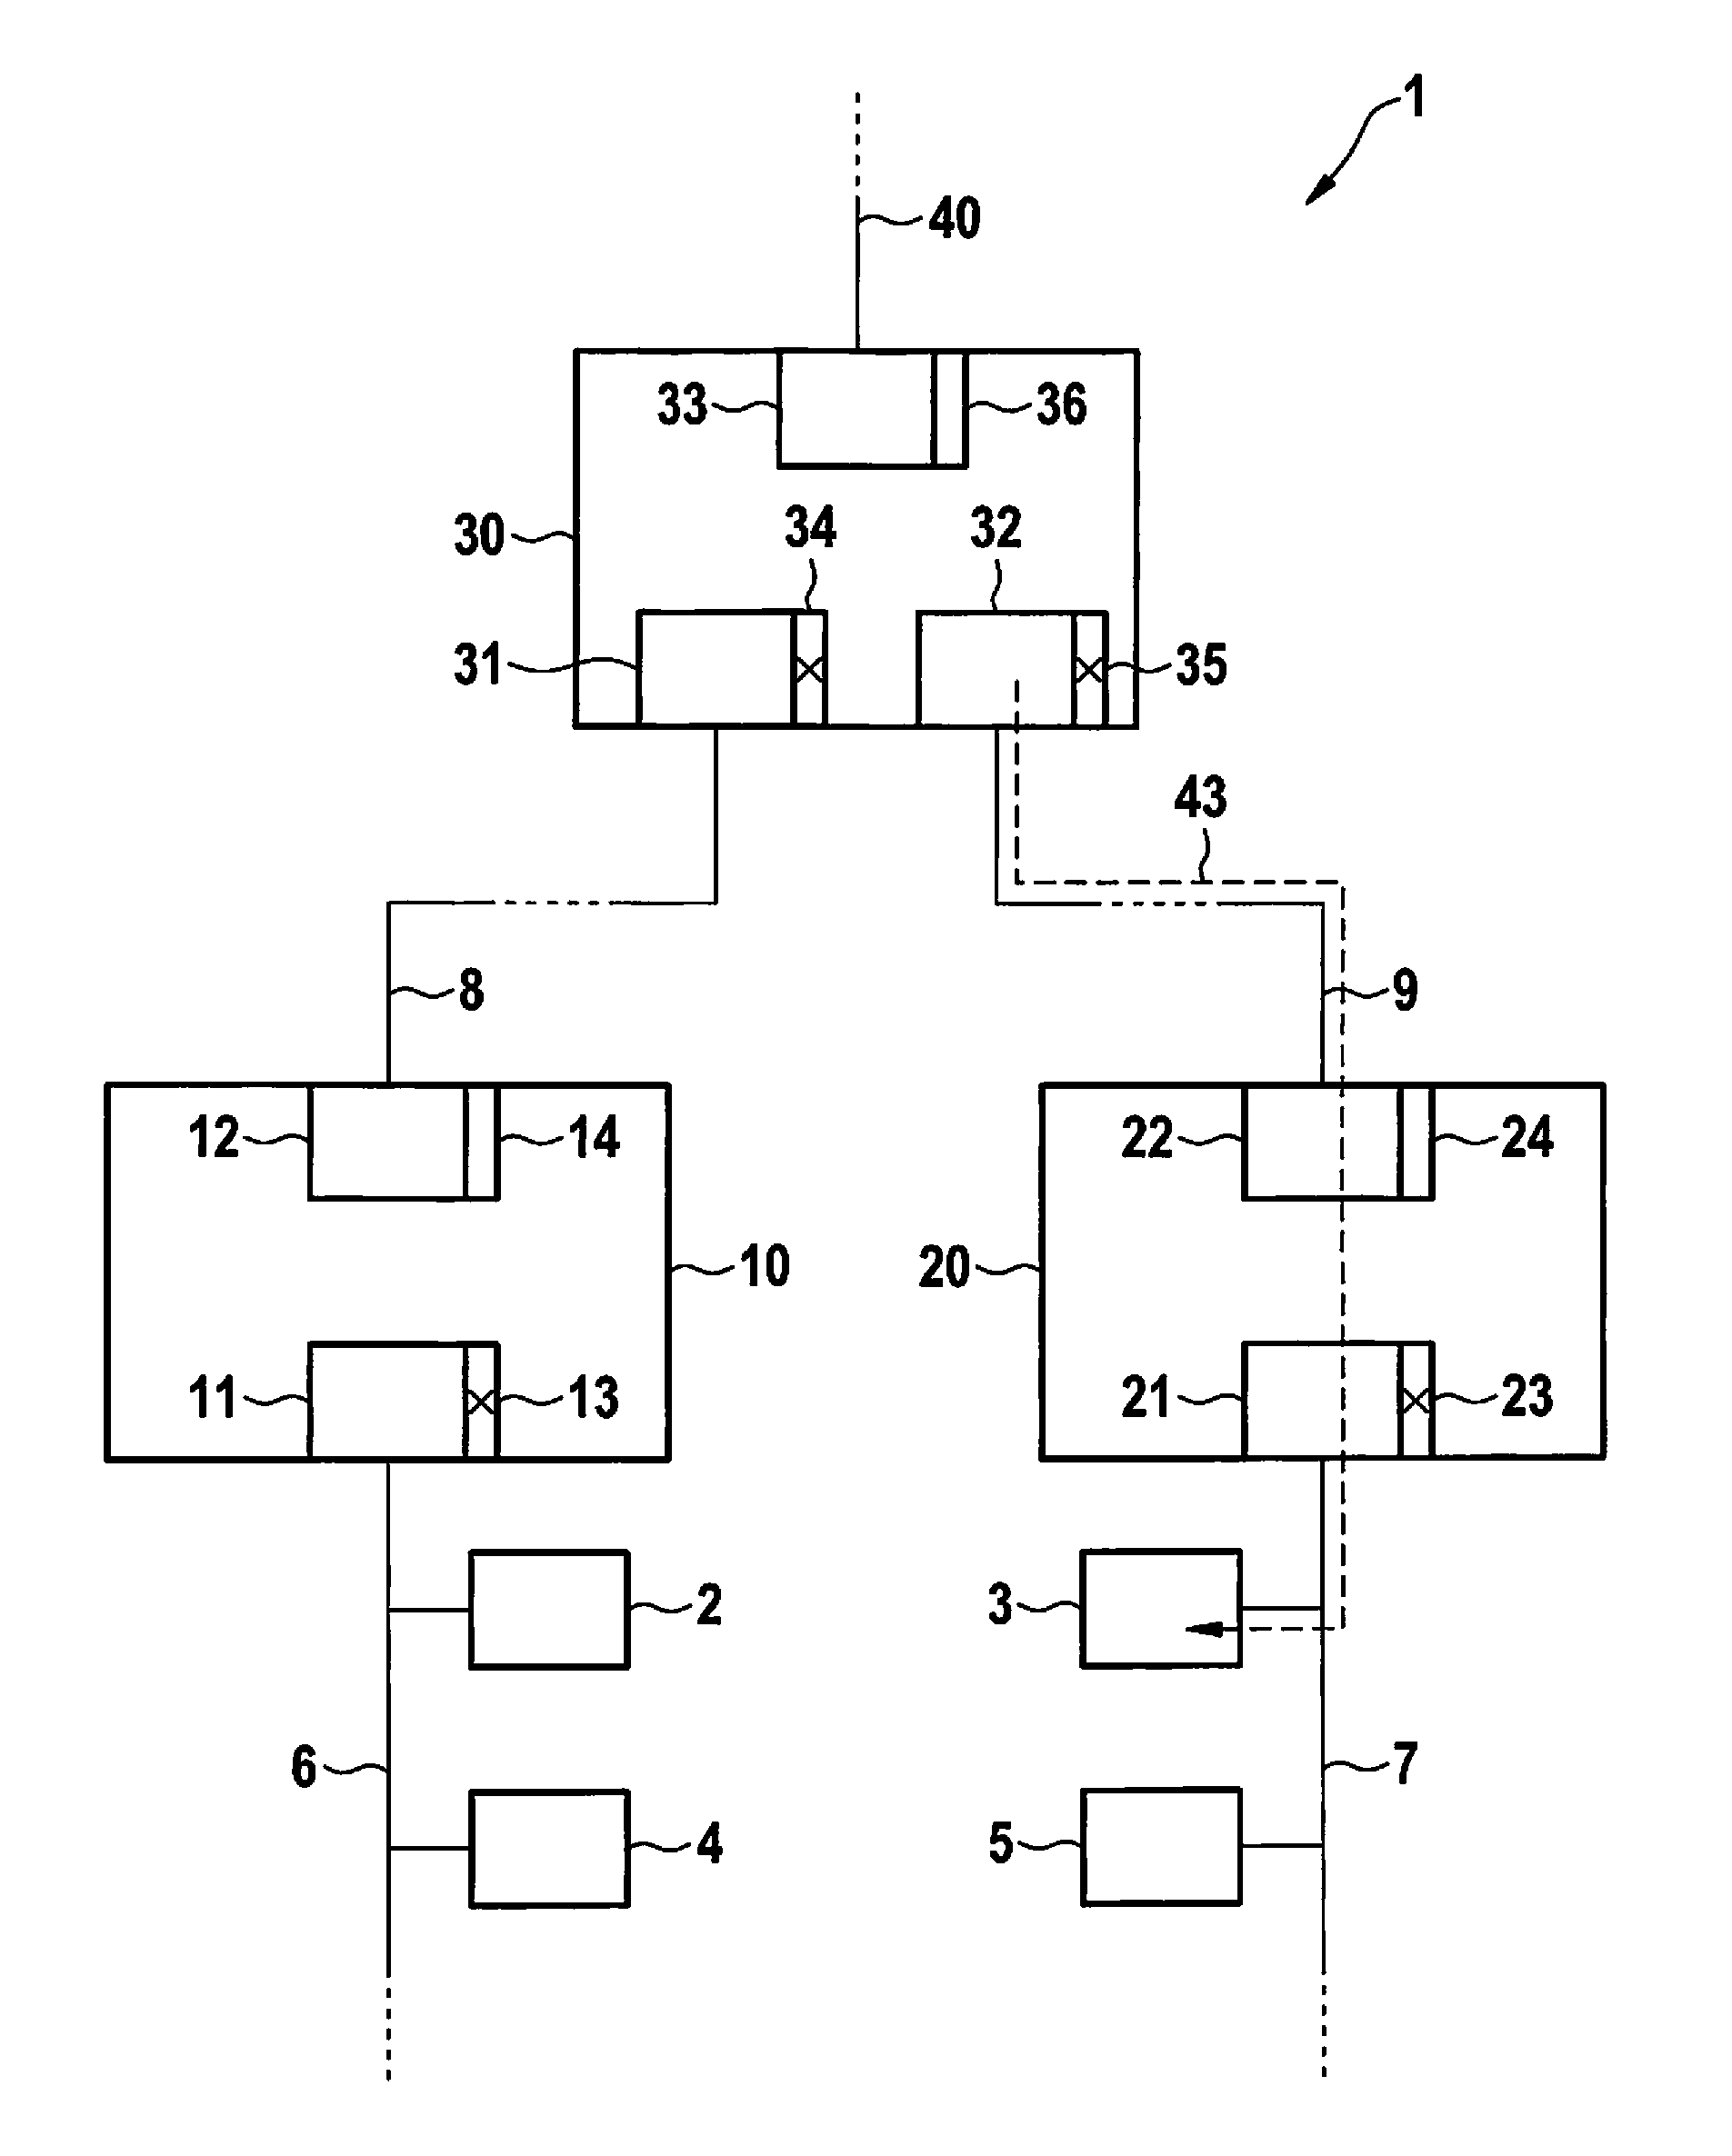 Method for operating a gateway